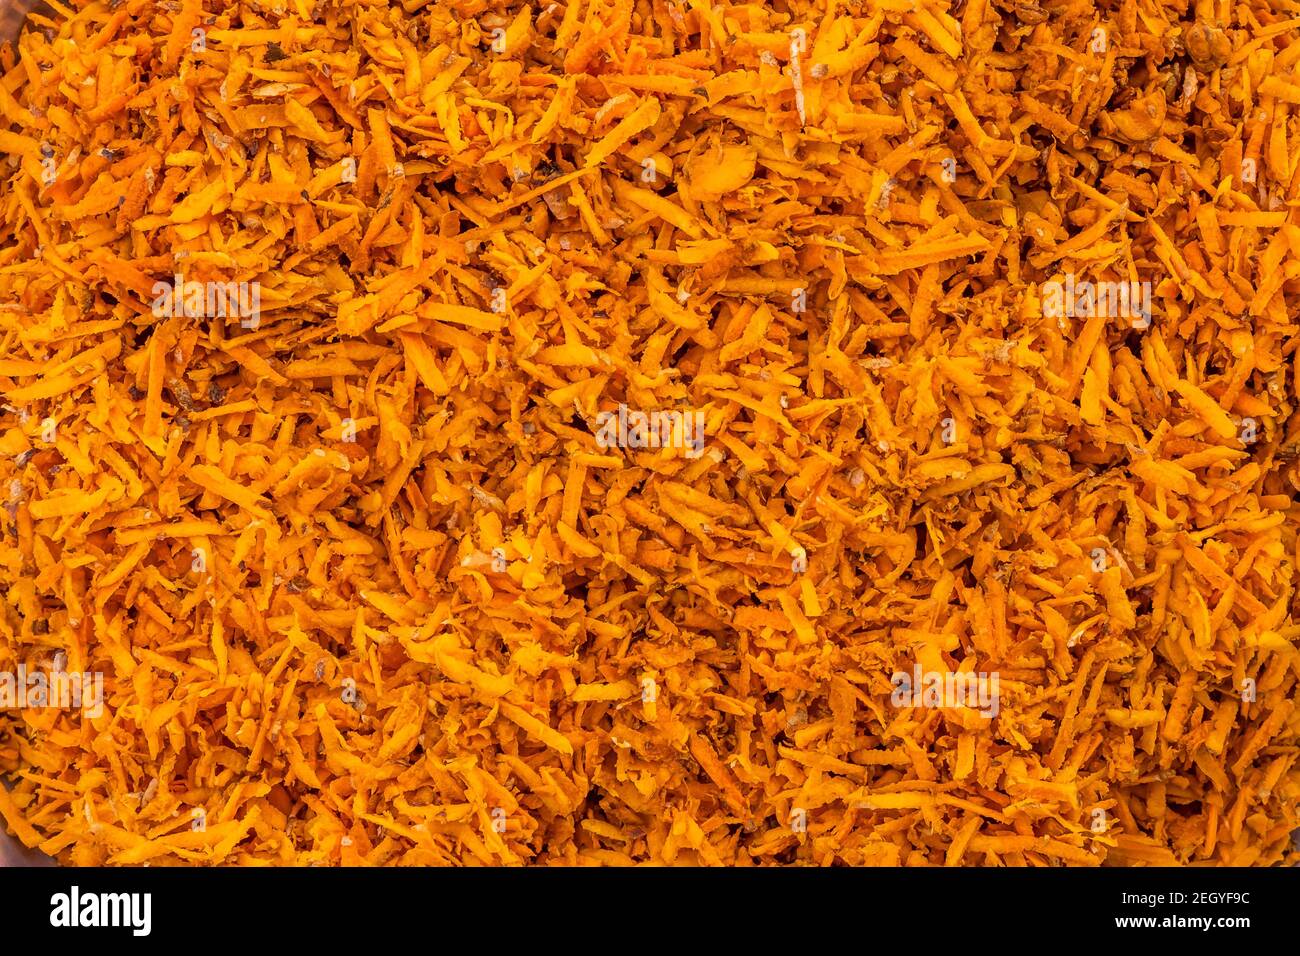 Background of shredded or grated turmeric roots into fine pieces for medicinal and food purpose. Stock Photo